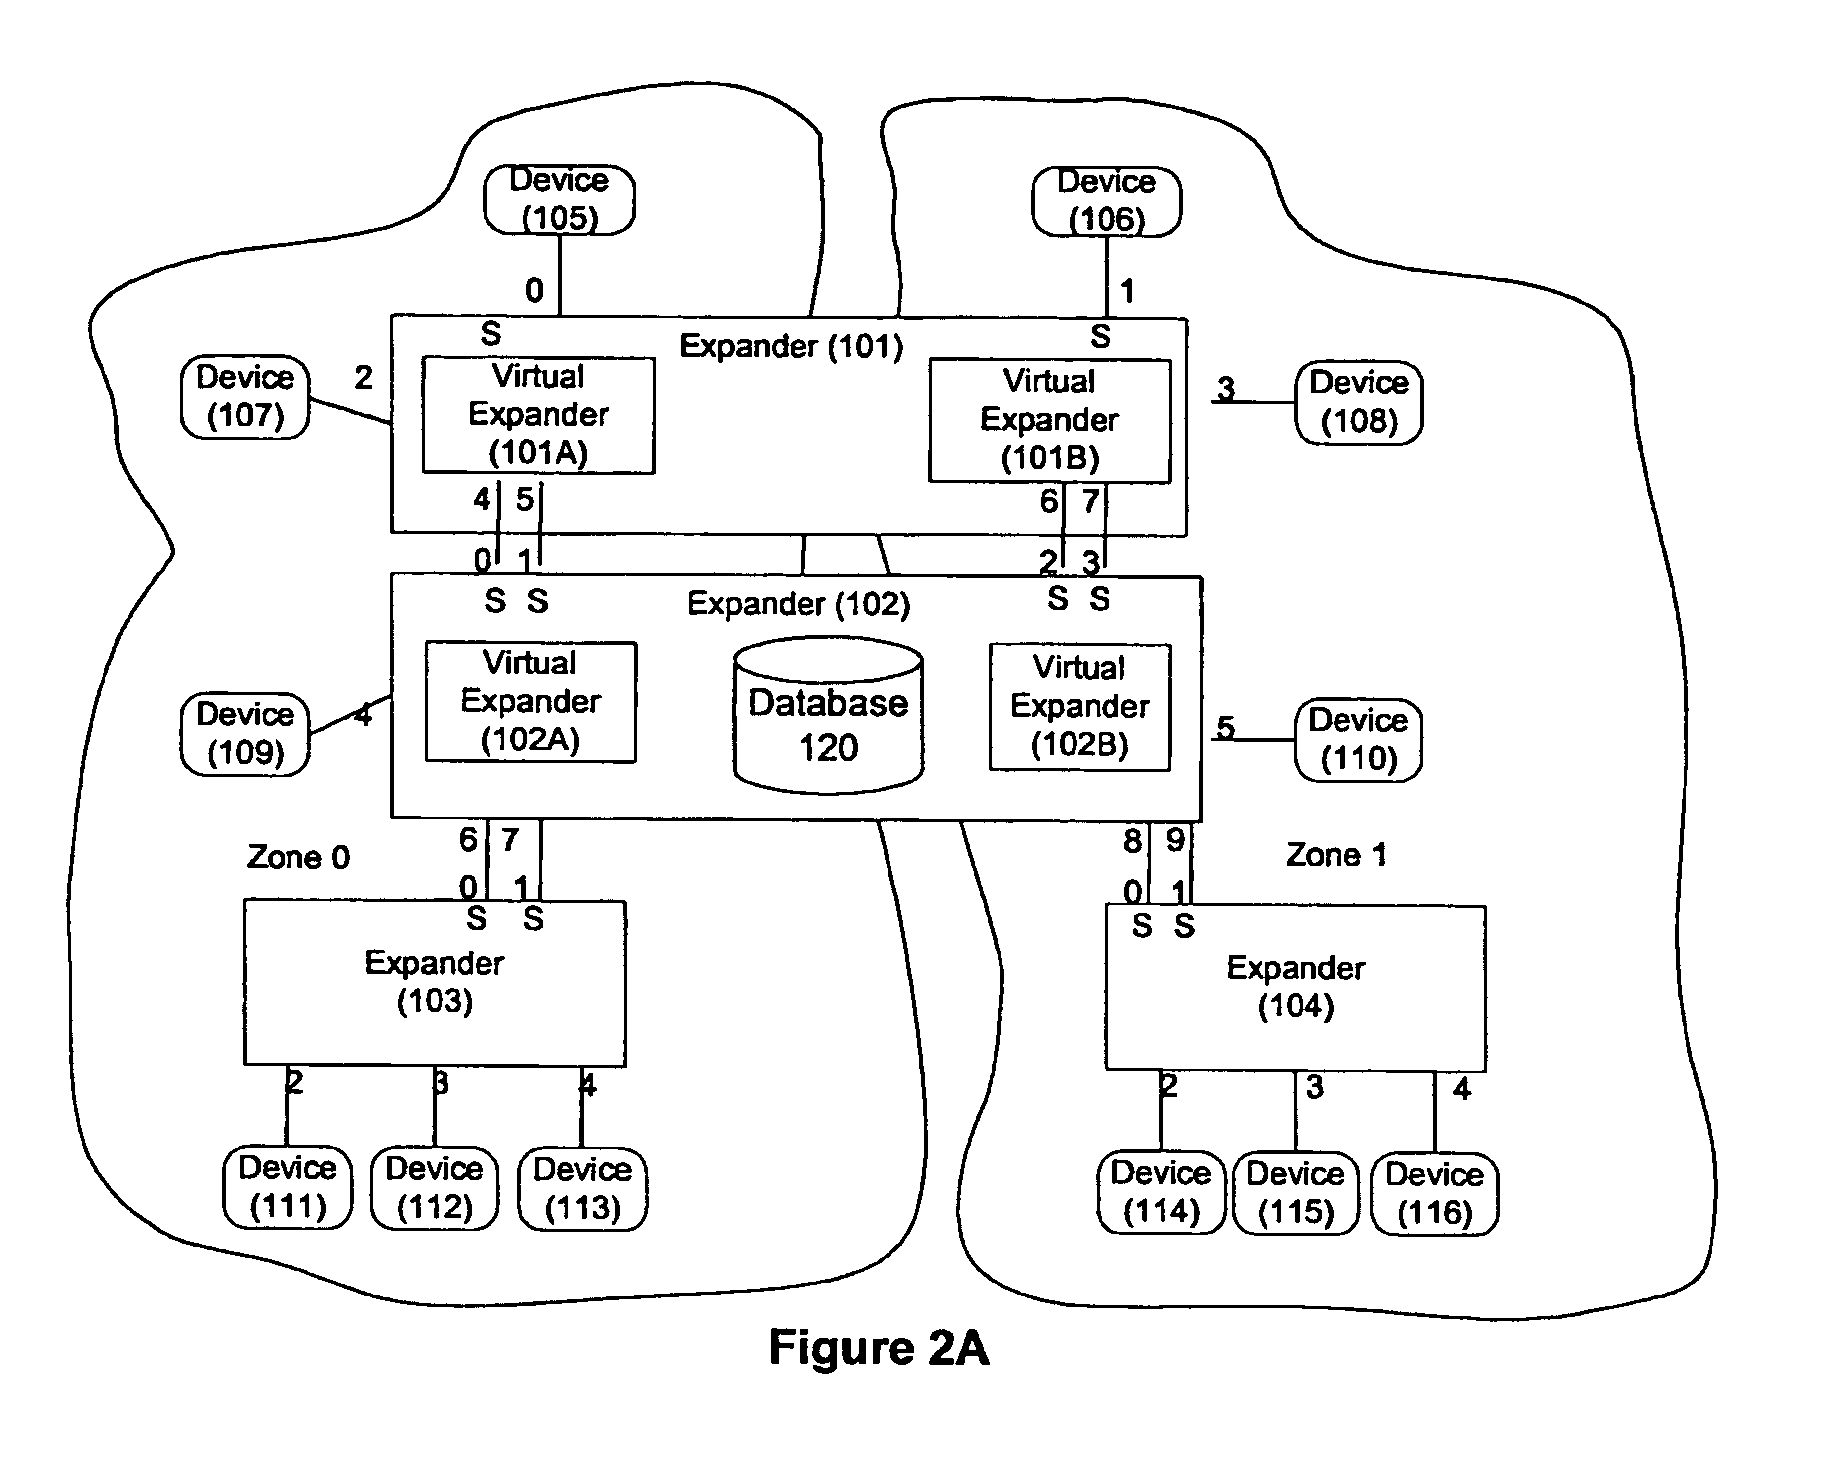 Method and apparatus for routing in SAS using logical zones